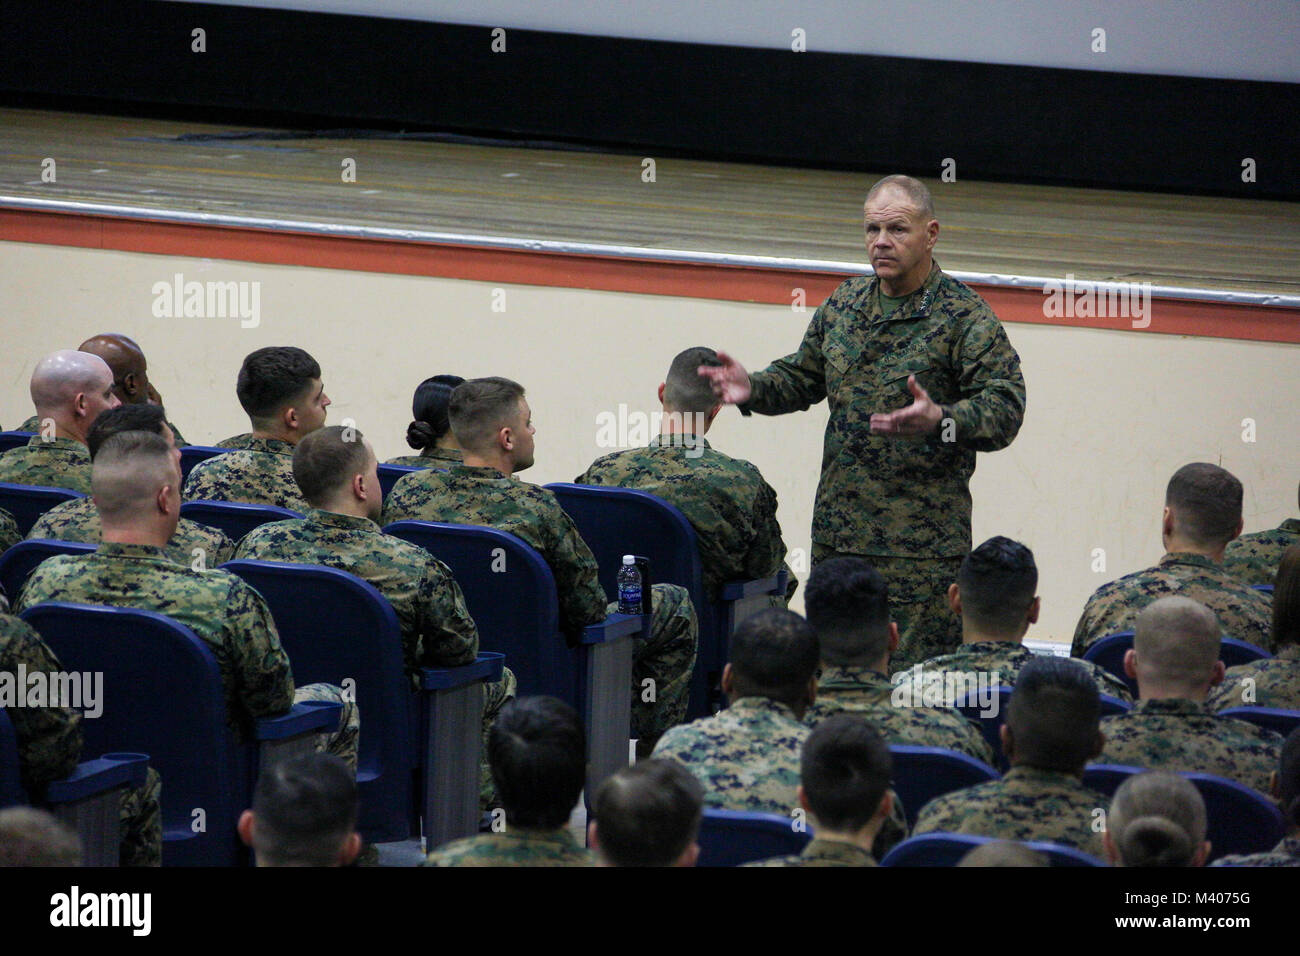 Commandant of the Marine Corps Gen. Robert B. Neller speaks at town halls during a visit to Twentynine Palms, Calif., February 7, 2018. Neller addressed Marines and Sailors about his latest Message to the Force and answered questions. (U.S. Marine Corps photo by Sgt. Olivia G. Ortiz) Stock Photo